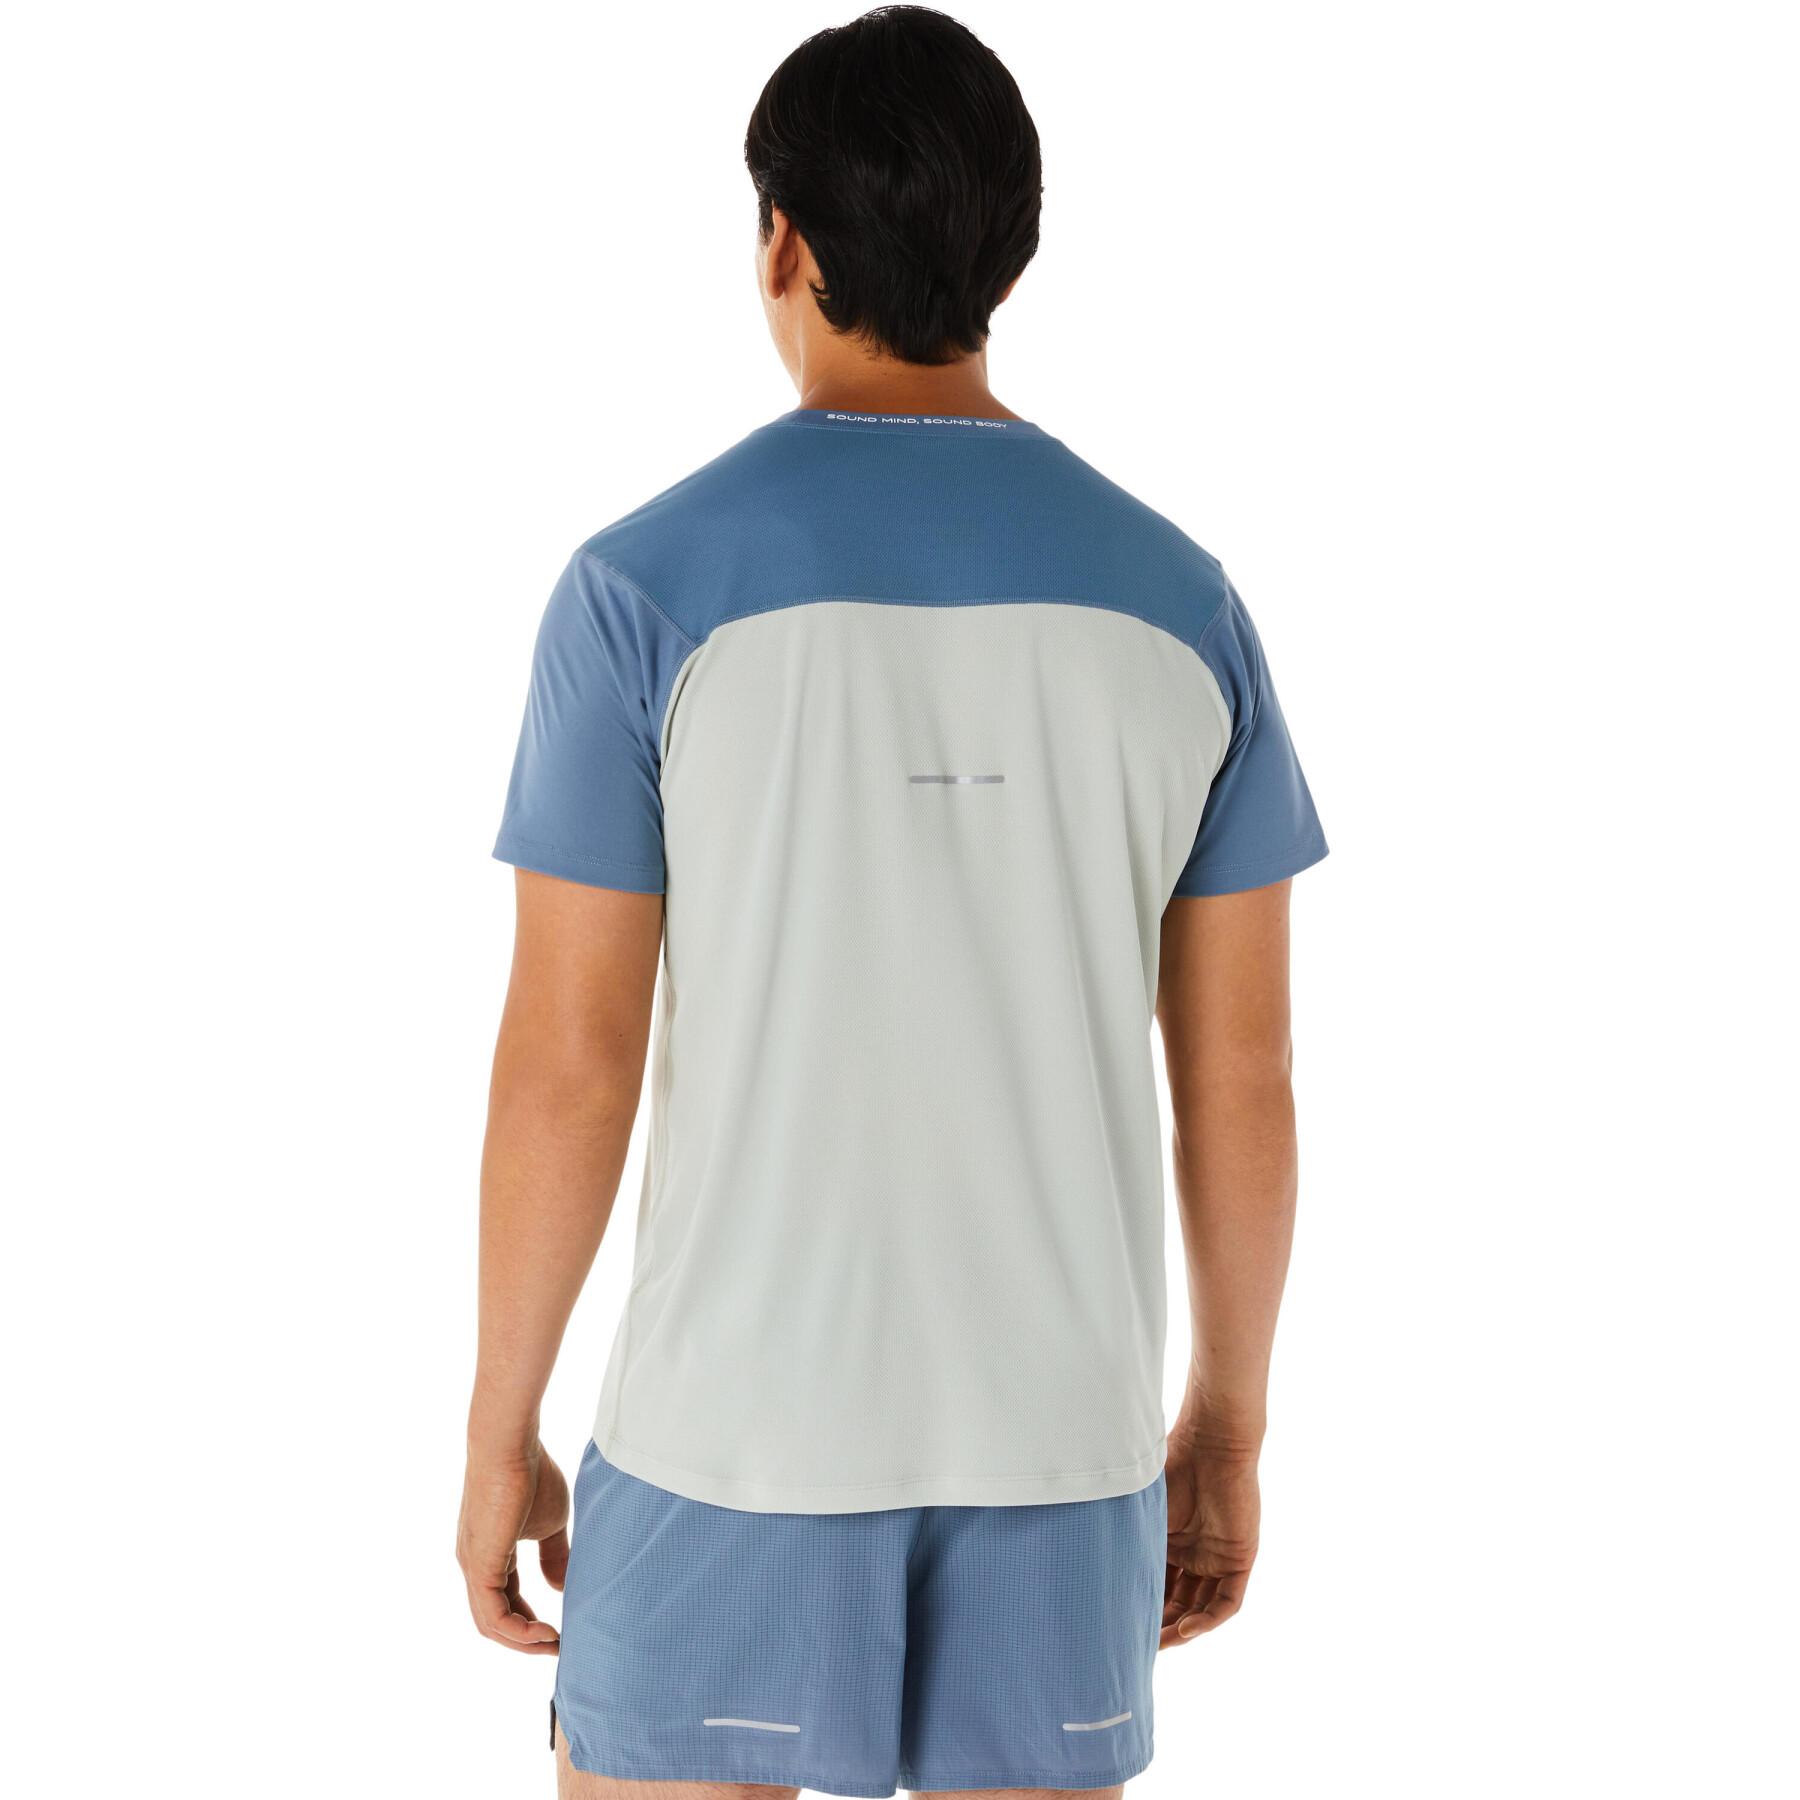 2-in-1 shorts Asics Core